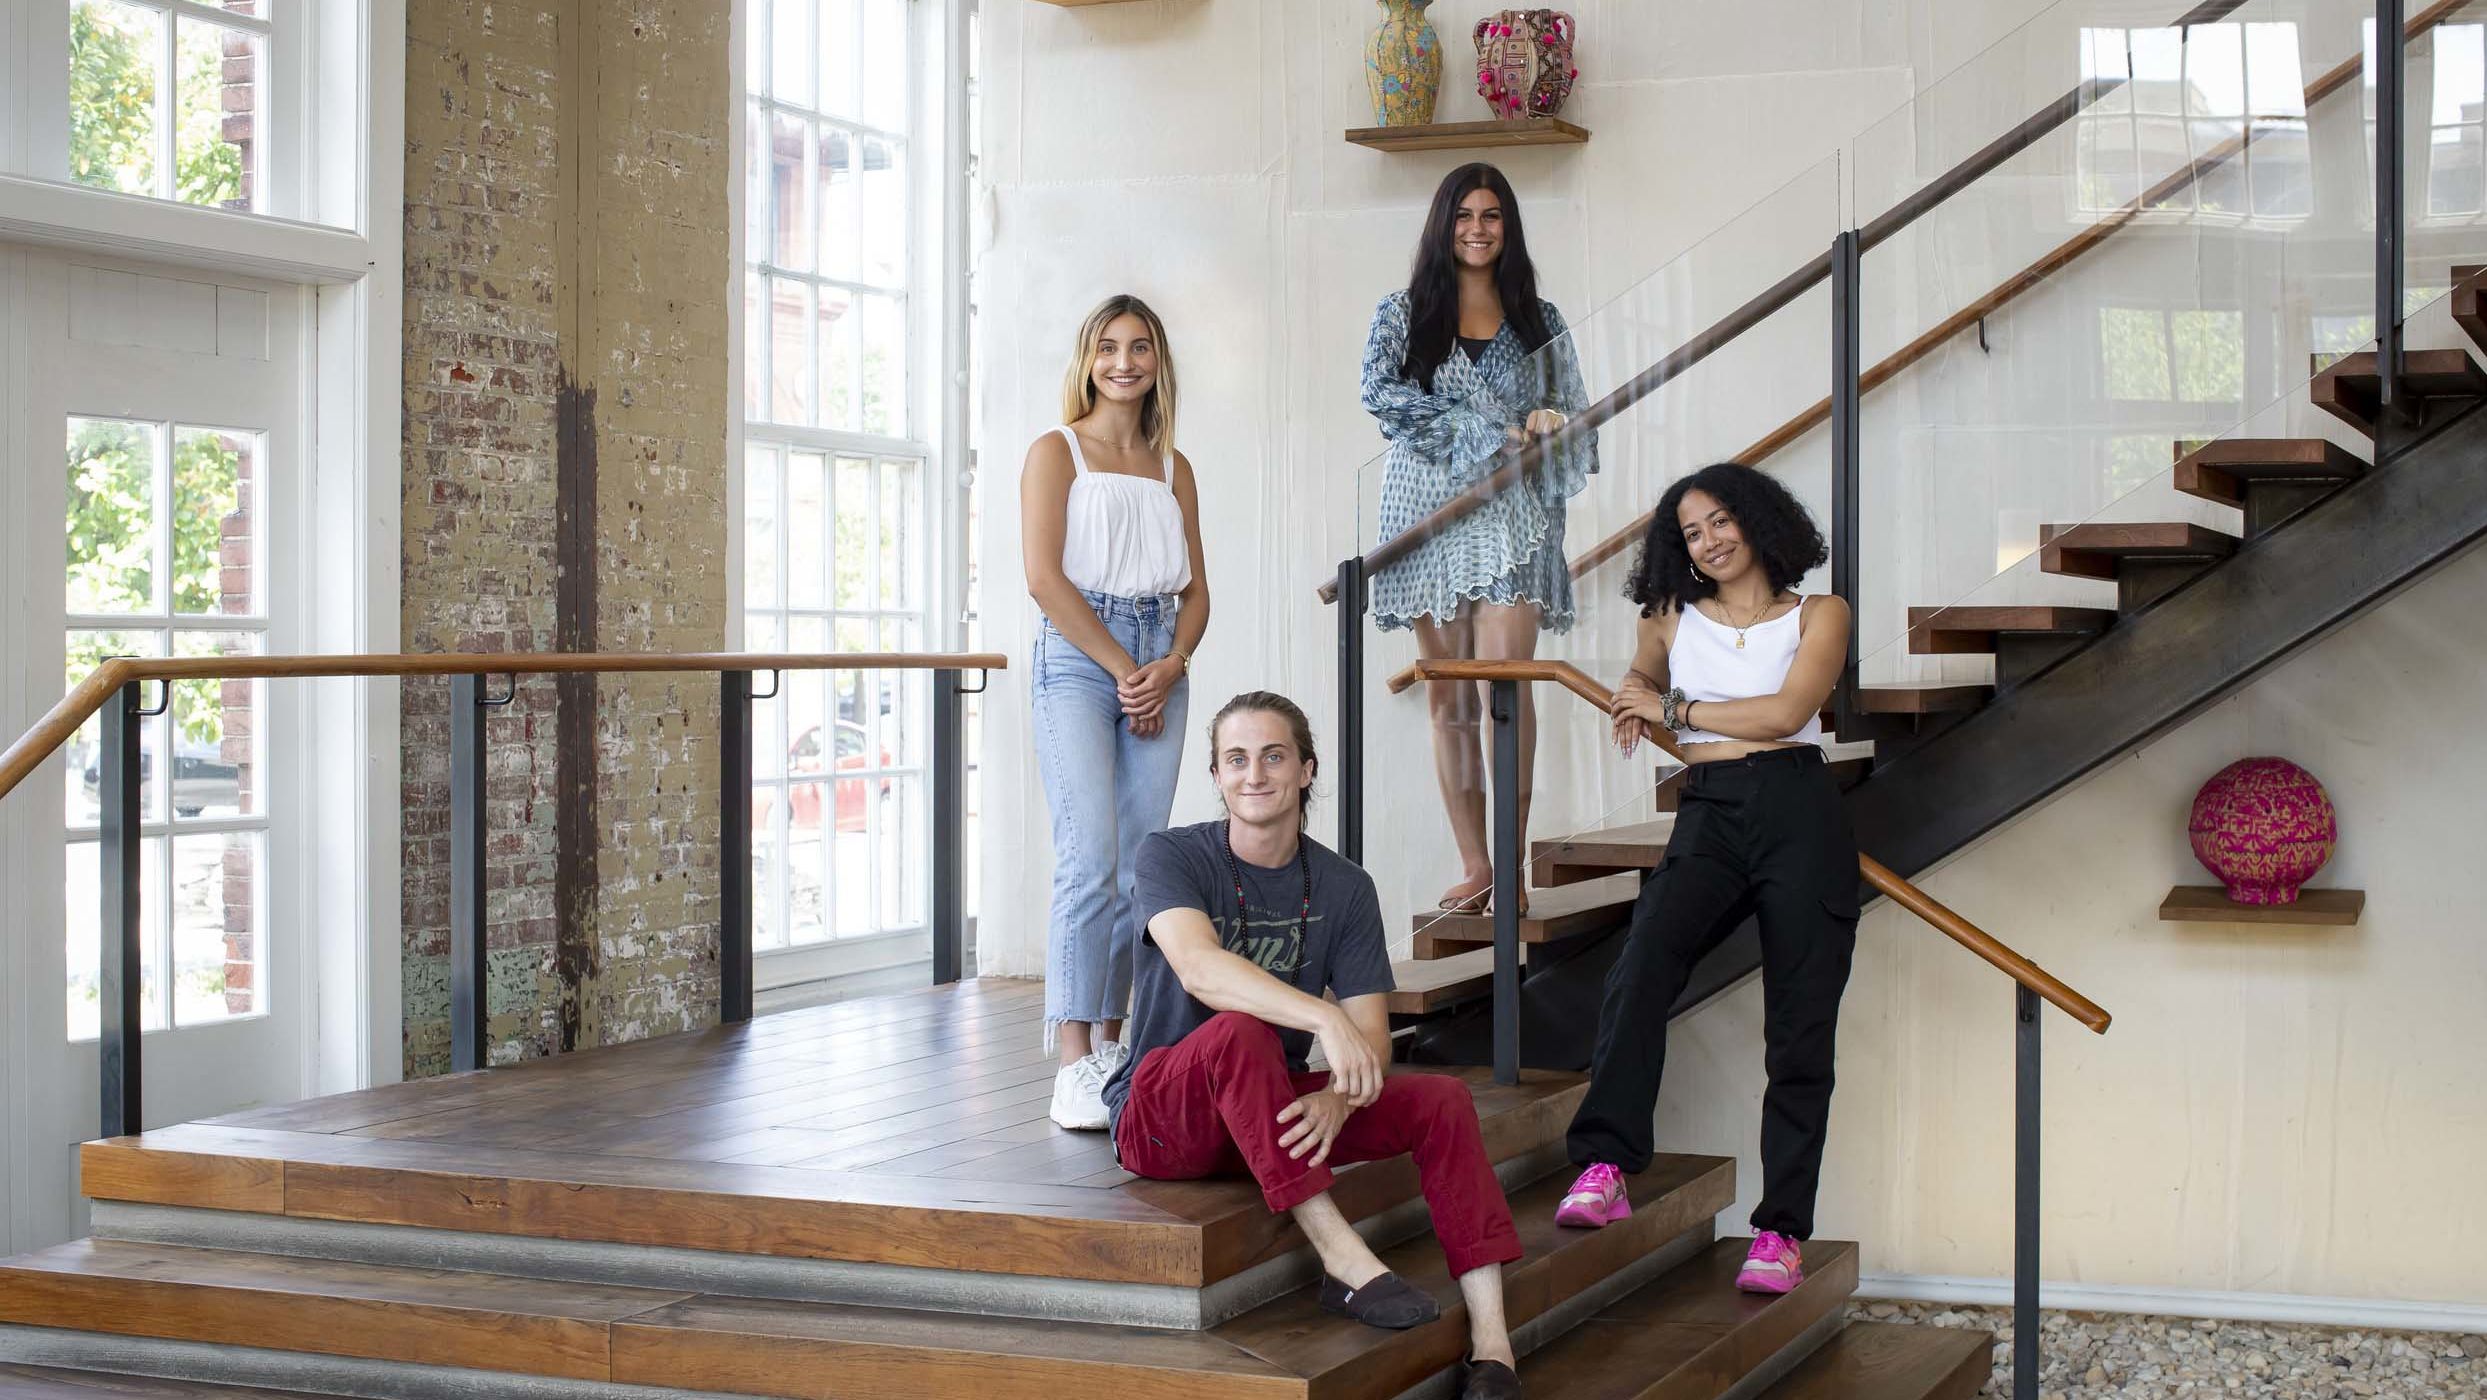 Temple University students complete summer internships at URBN, located at the Philadelphia Navy Yard, working on marketing, buying, public relations and design. 